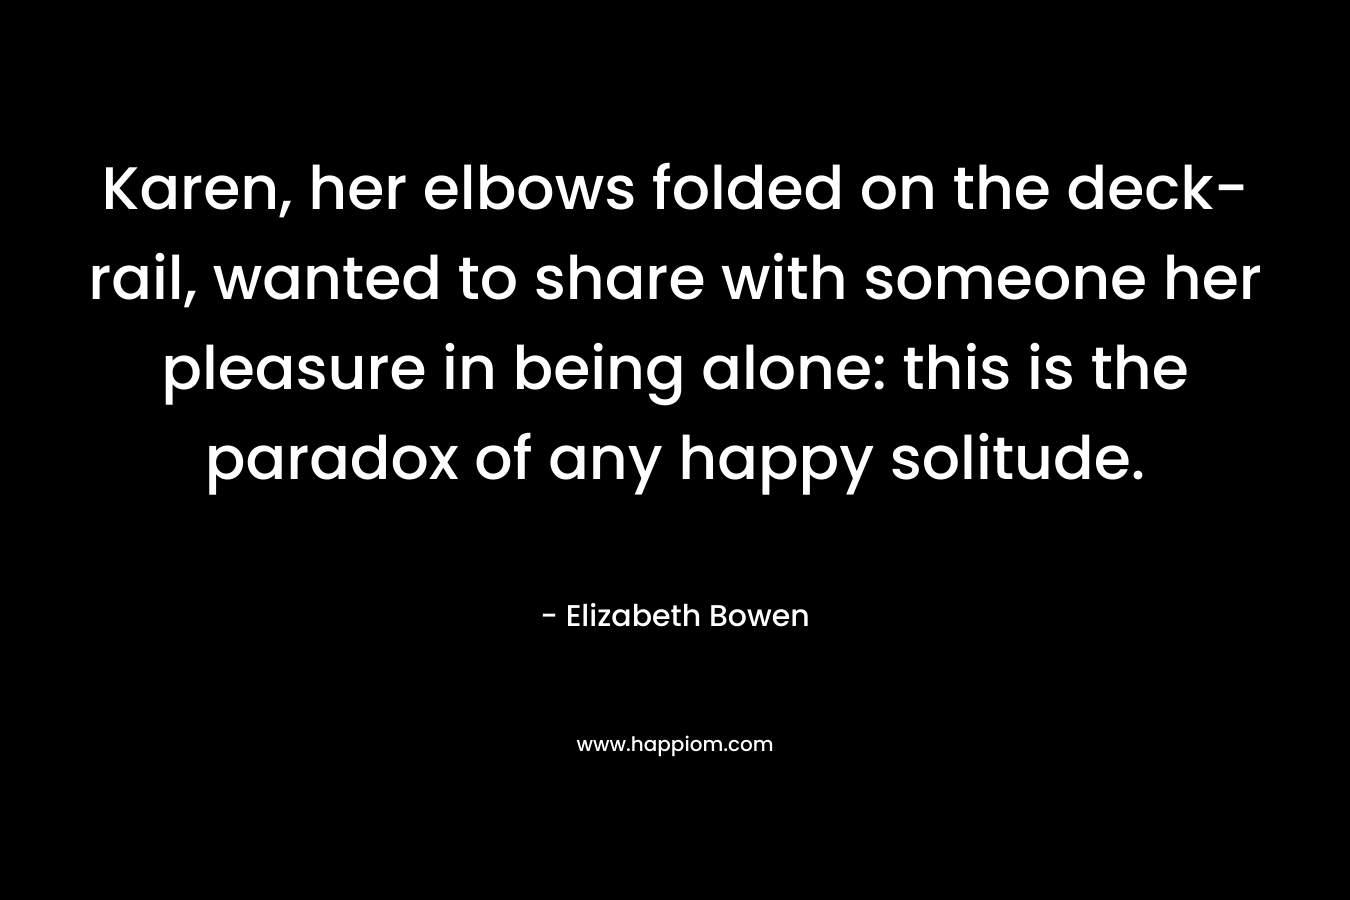 Karen, her elbows folded on the deck-rail, wanted to share with someone her pleasure in being alone: this is the paradox of any happy solitude. – Elizabeth Bowen